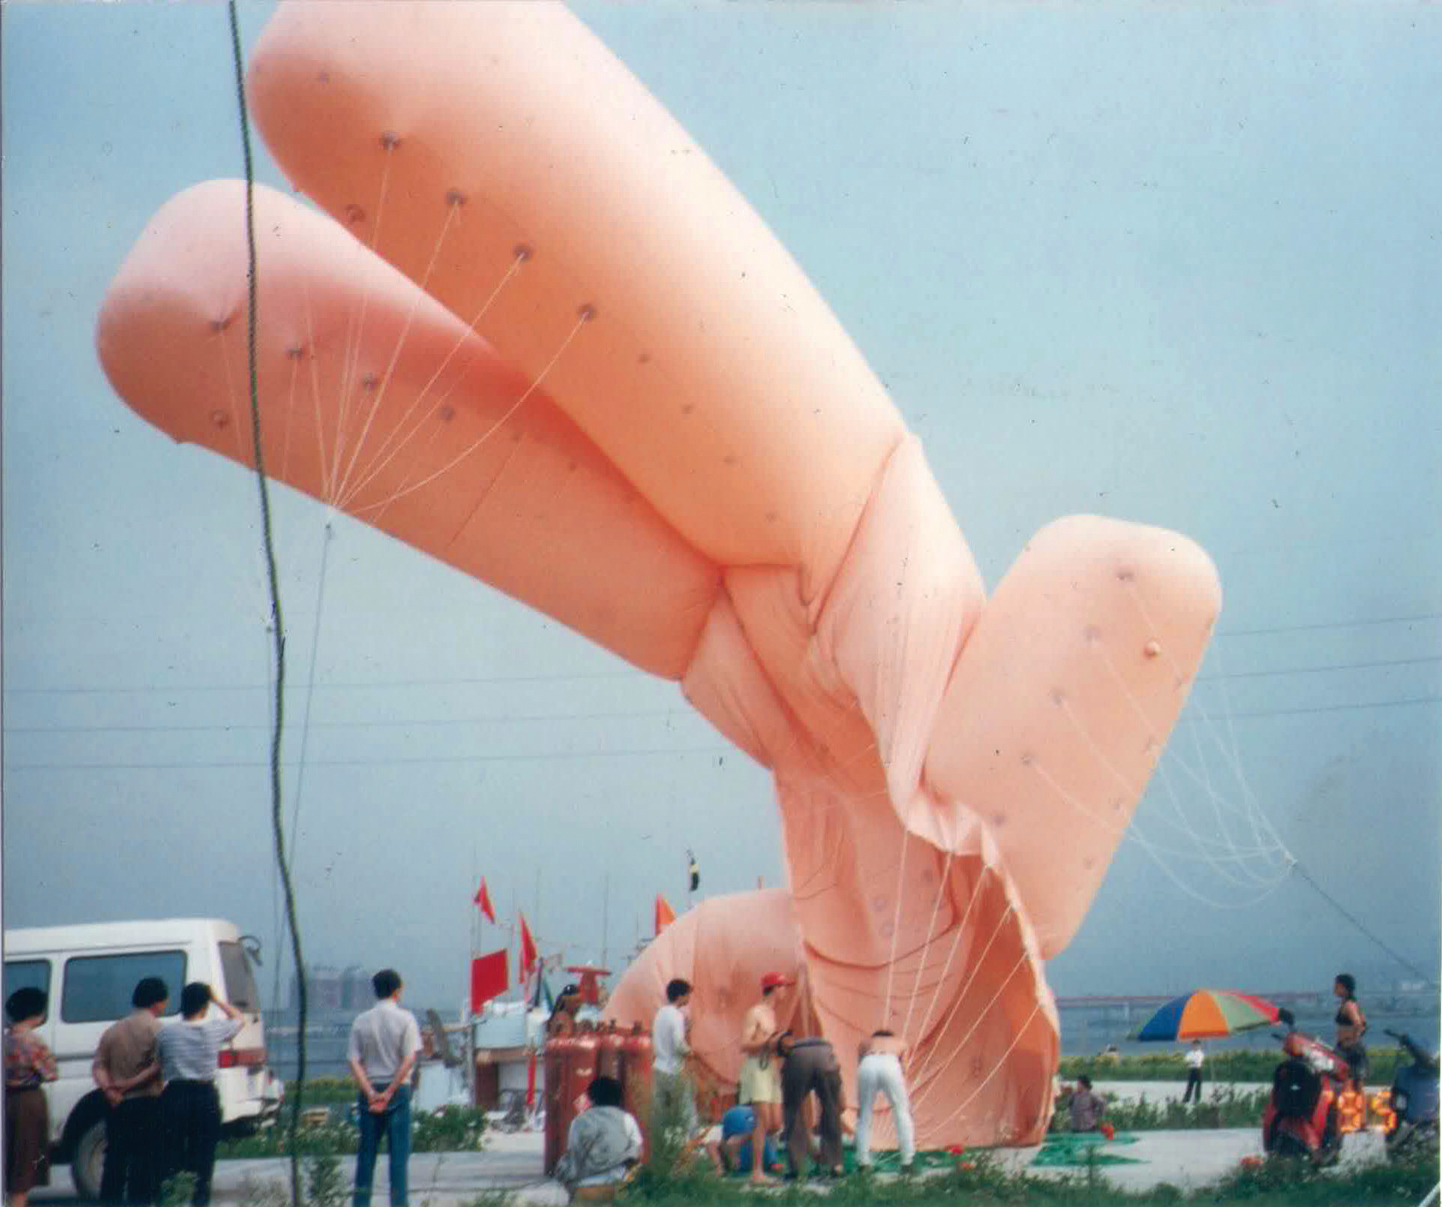 A giant balloon puppet featured in the Taipei Breaking Sky Festival (台北空中破裂節), 1994. Image courtesy of Yao Jui-Chung (姚瑞中).